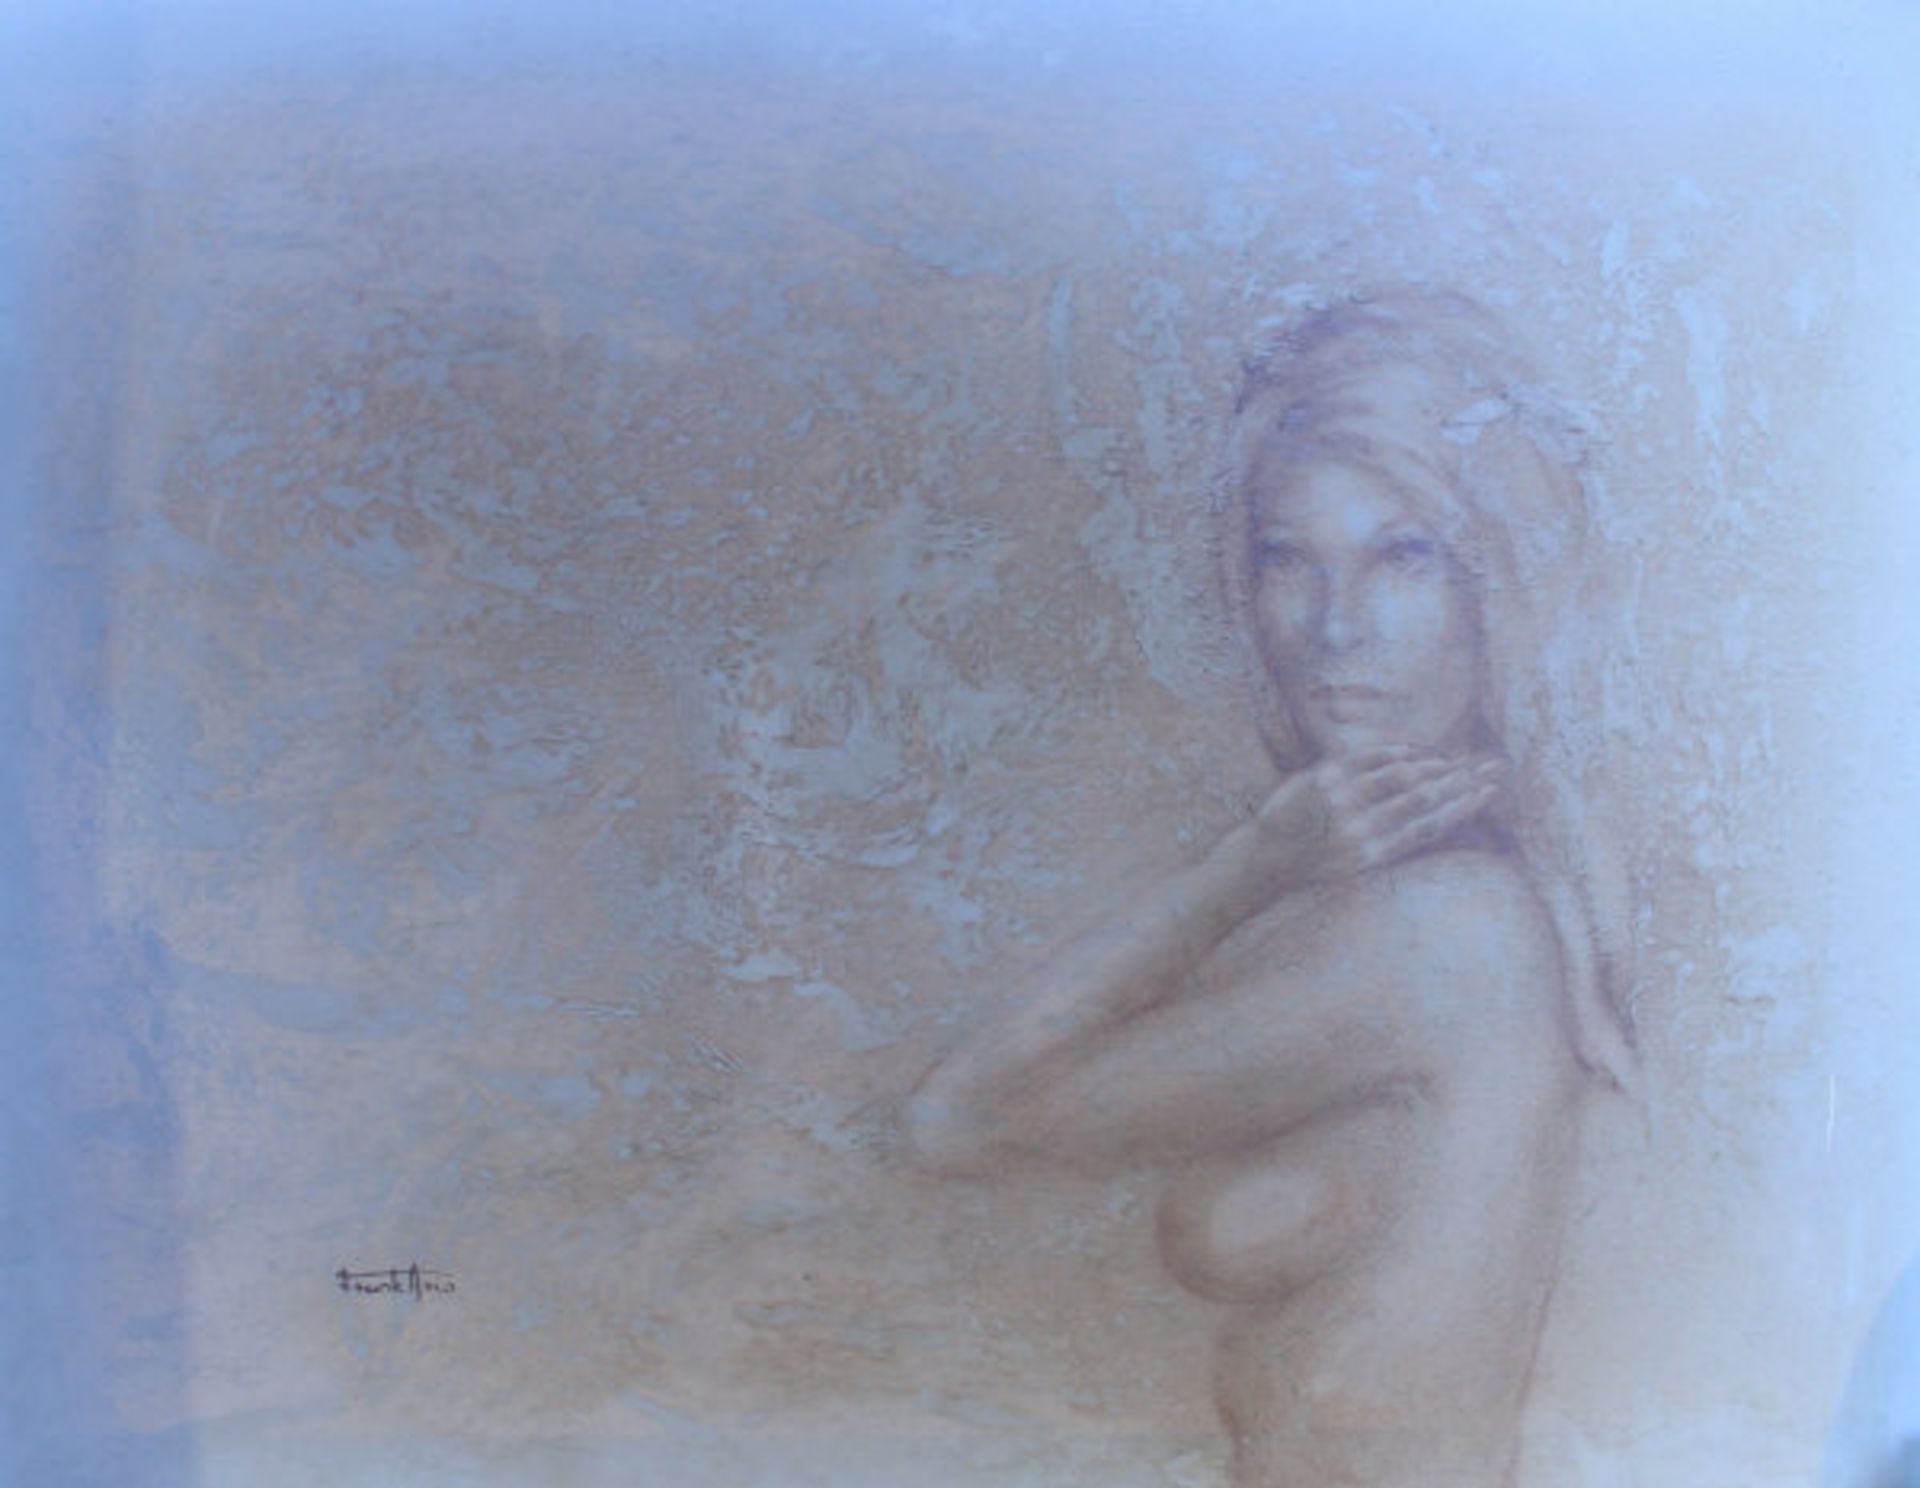 FRANK ARIS "Nude" study in sepia monochrome acrylic signed lower left together with AFTER ALDINO